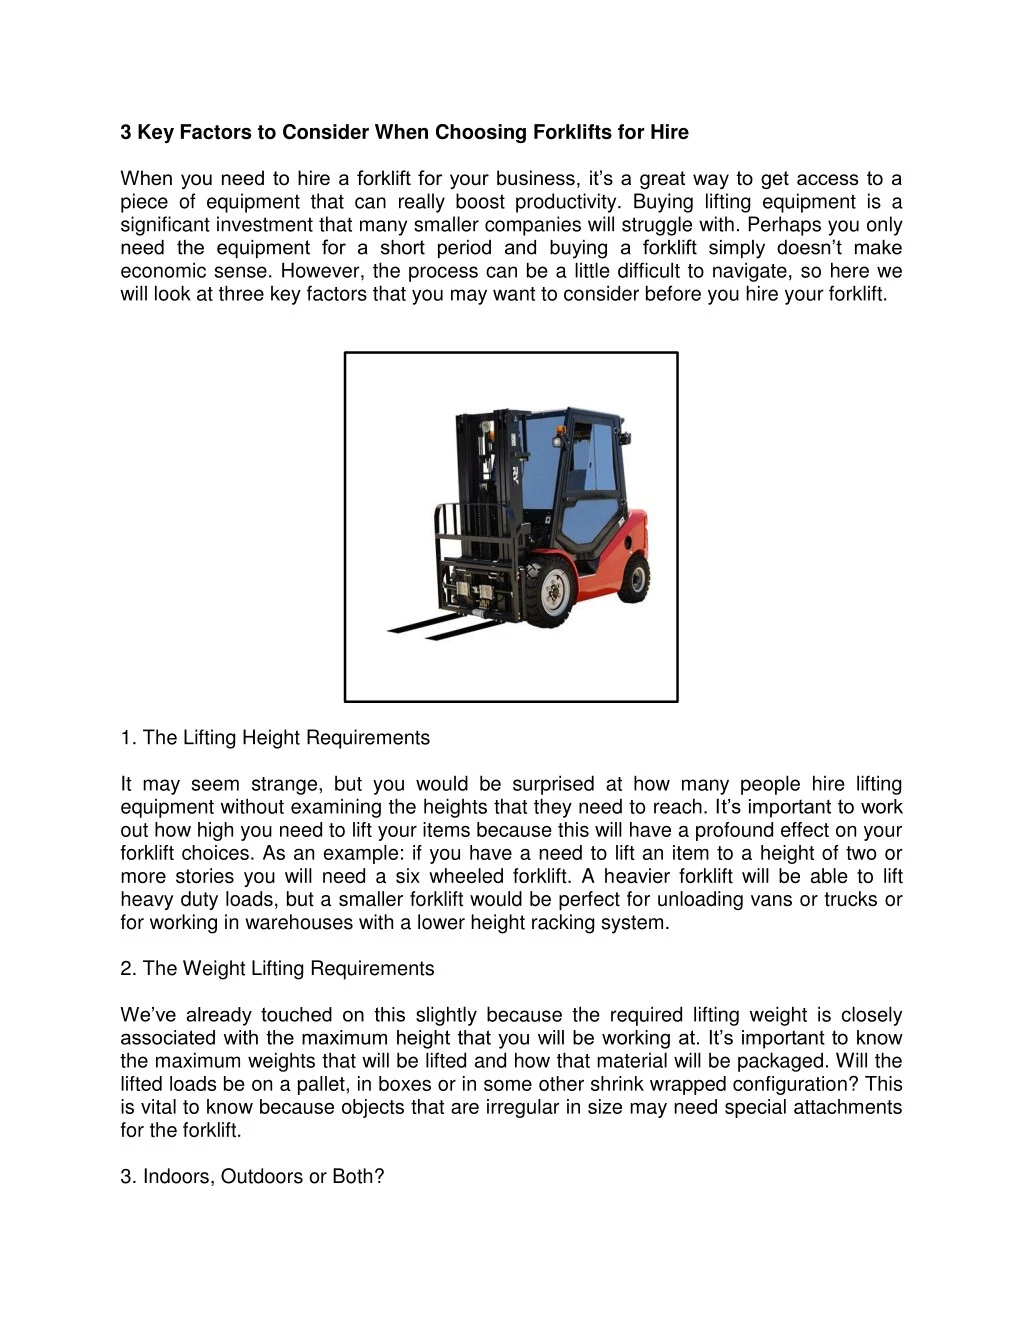 3 key factors to consider when choosing forklifts